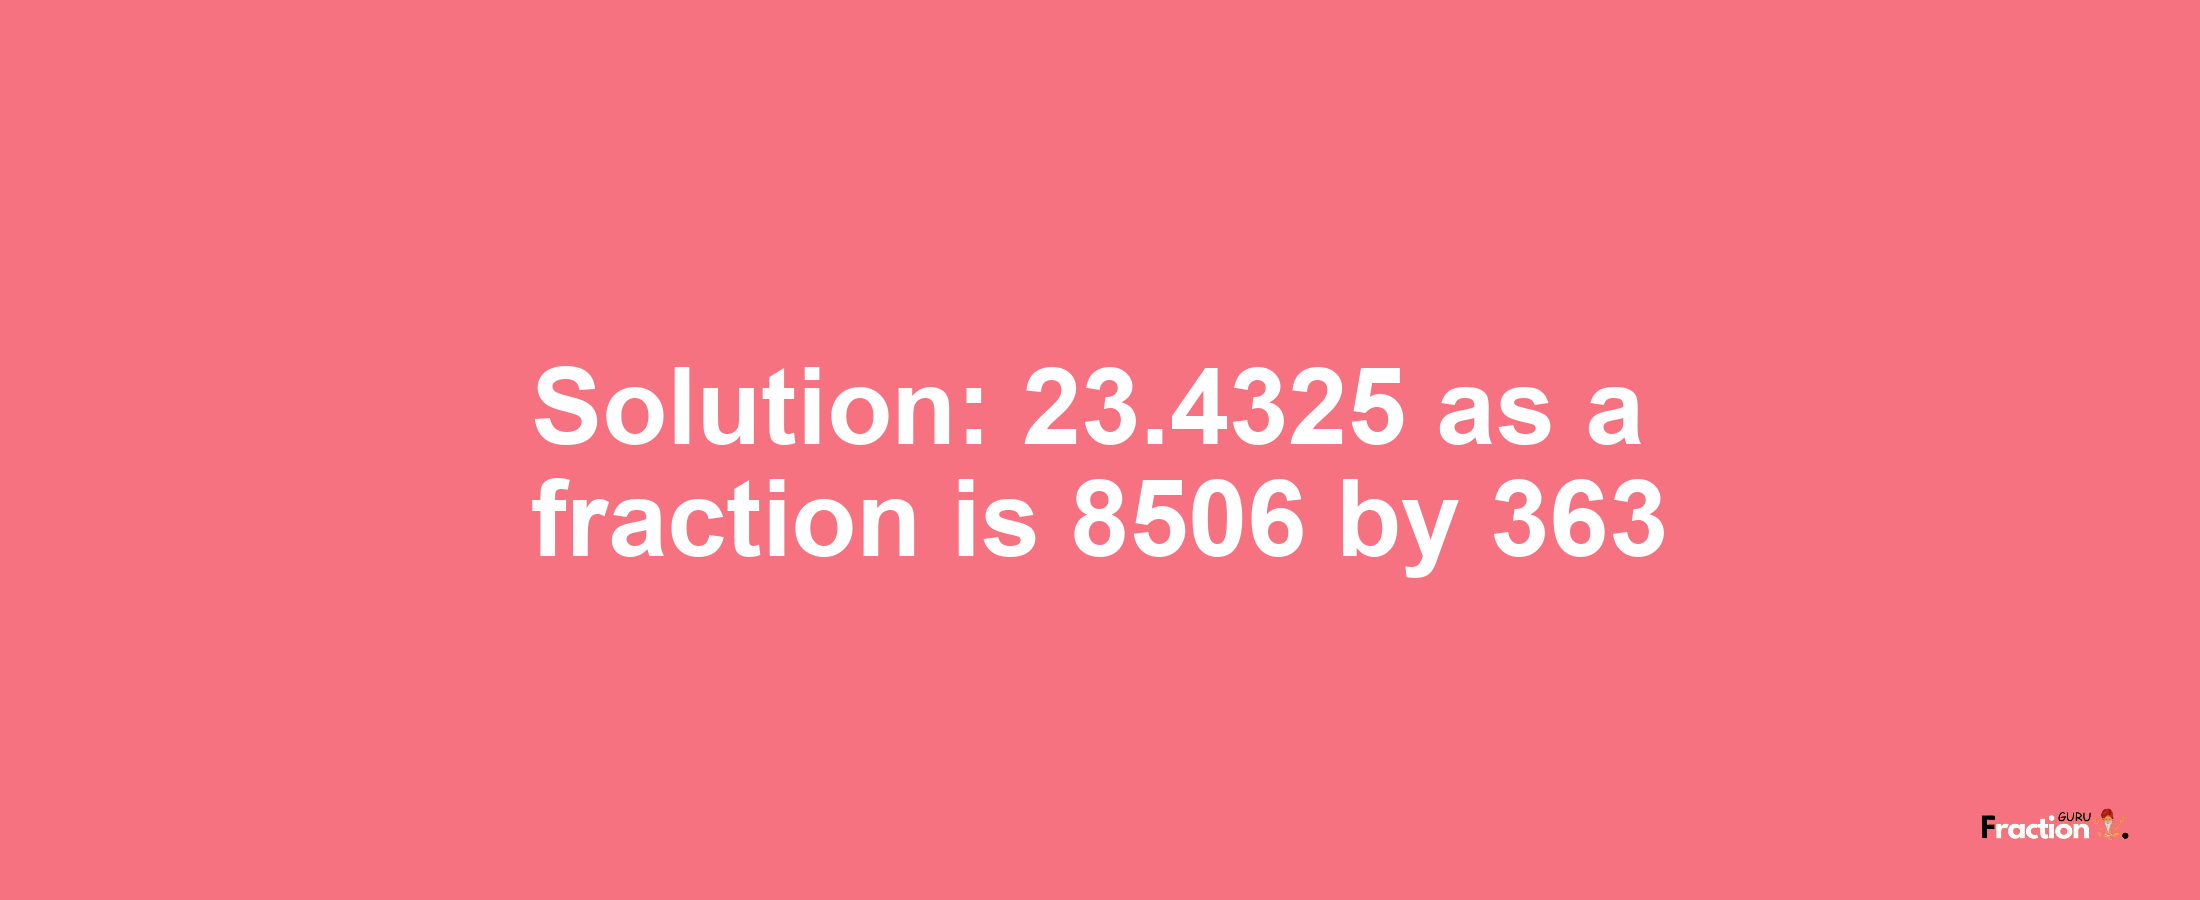 Solution:23.4325 as a fraction is 8506/363